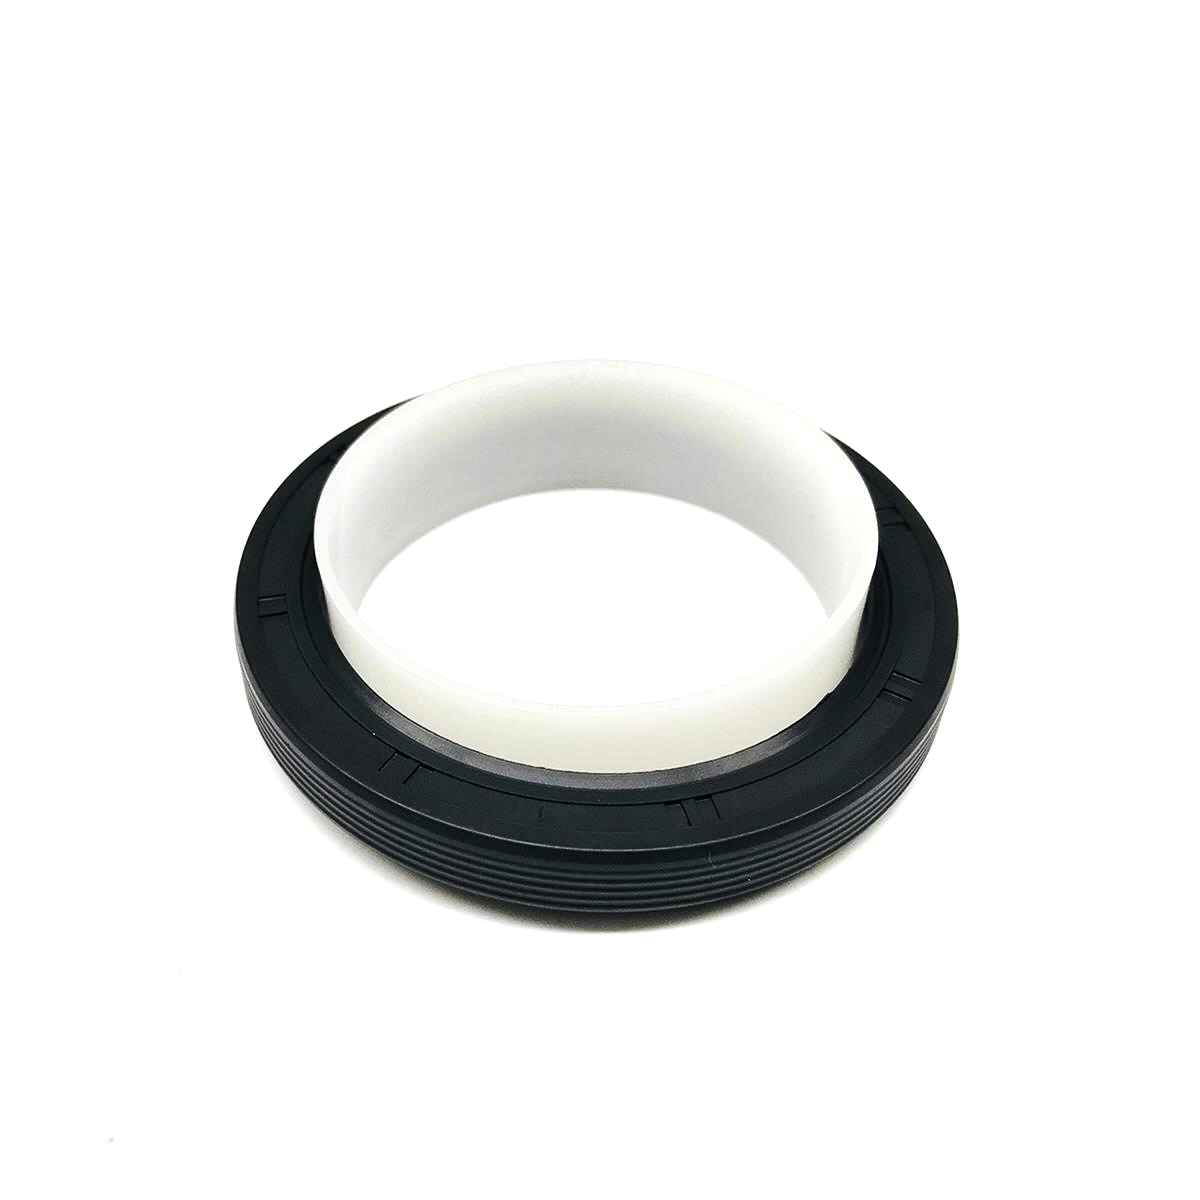 SCE Gaskets 11902 Timing Cover Seal, Rubber / PTFE, GM LS-Series, Each